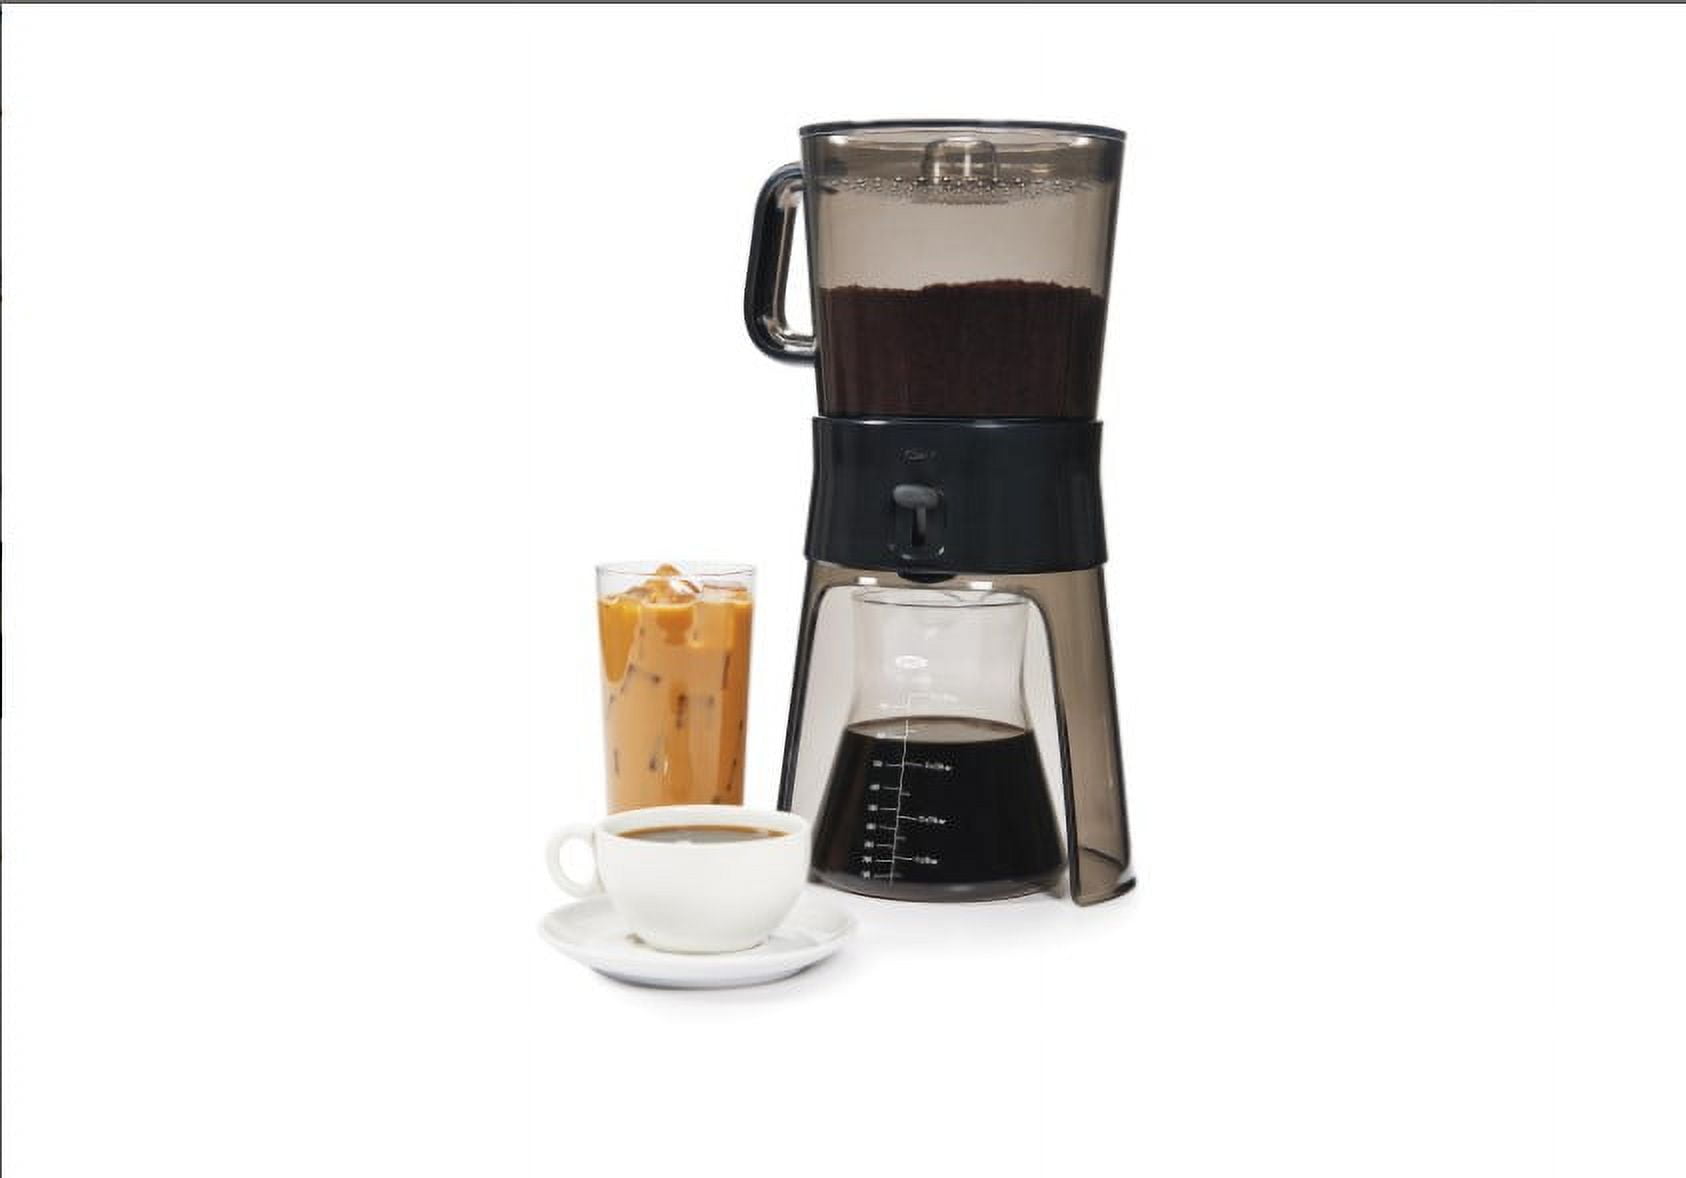 Product review: OXO Good Grips Cold Brew Coffee Maker – Binny's